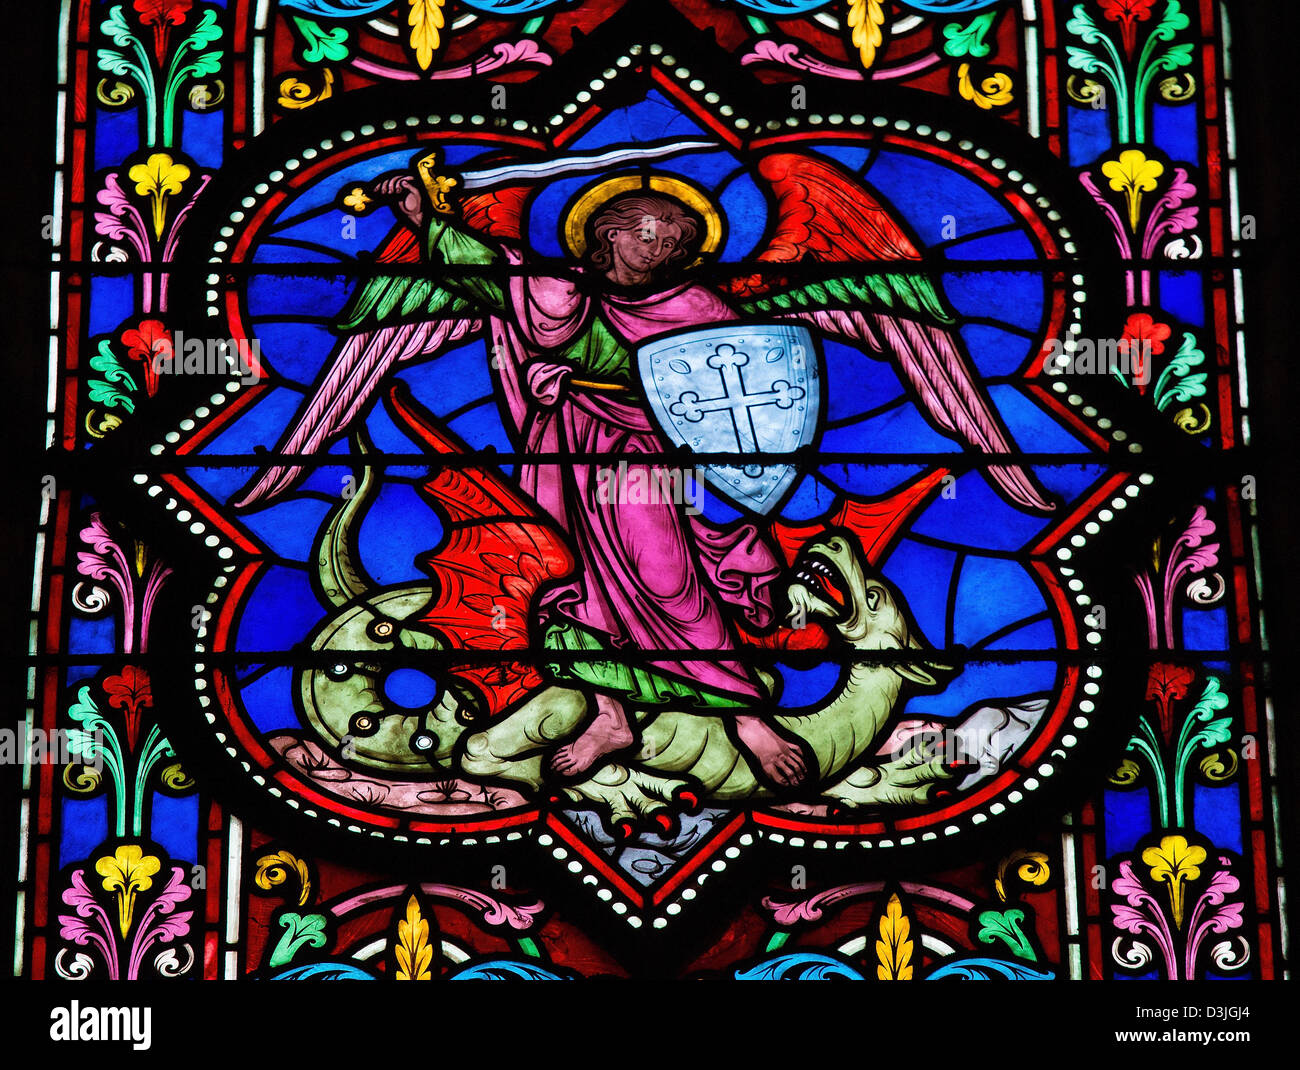 Stained glass window depicting Saint Michael the Archangel slaying Satan as a dragon Stock Photo